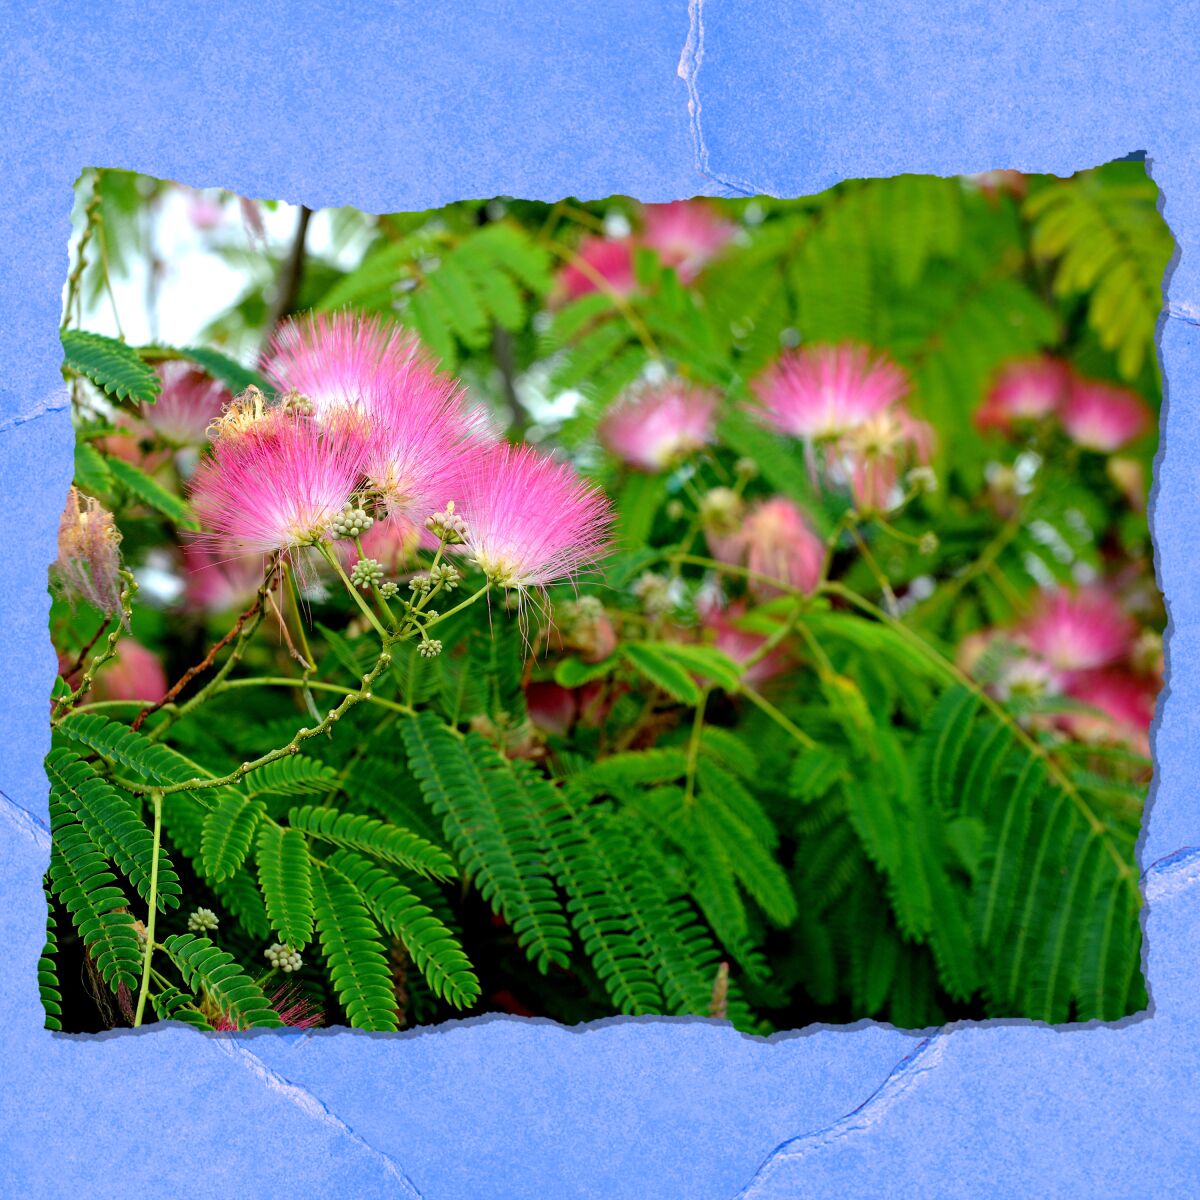 Closeup of fern-like branches and fluffy pink blossoms.